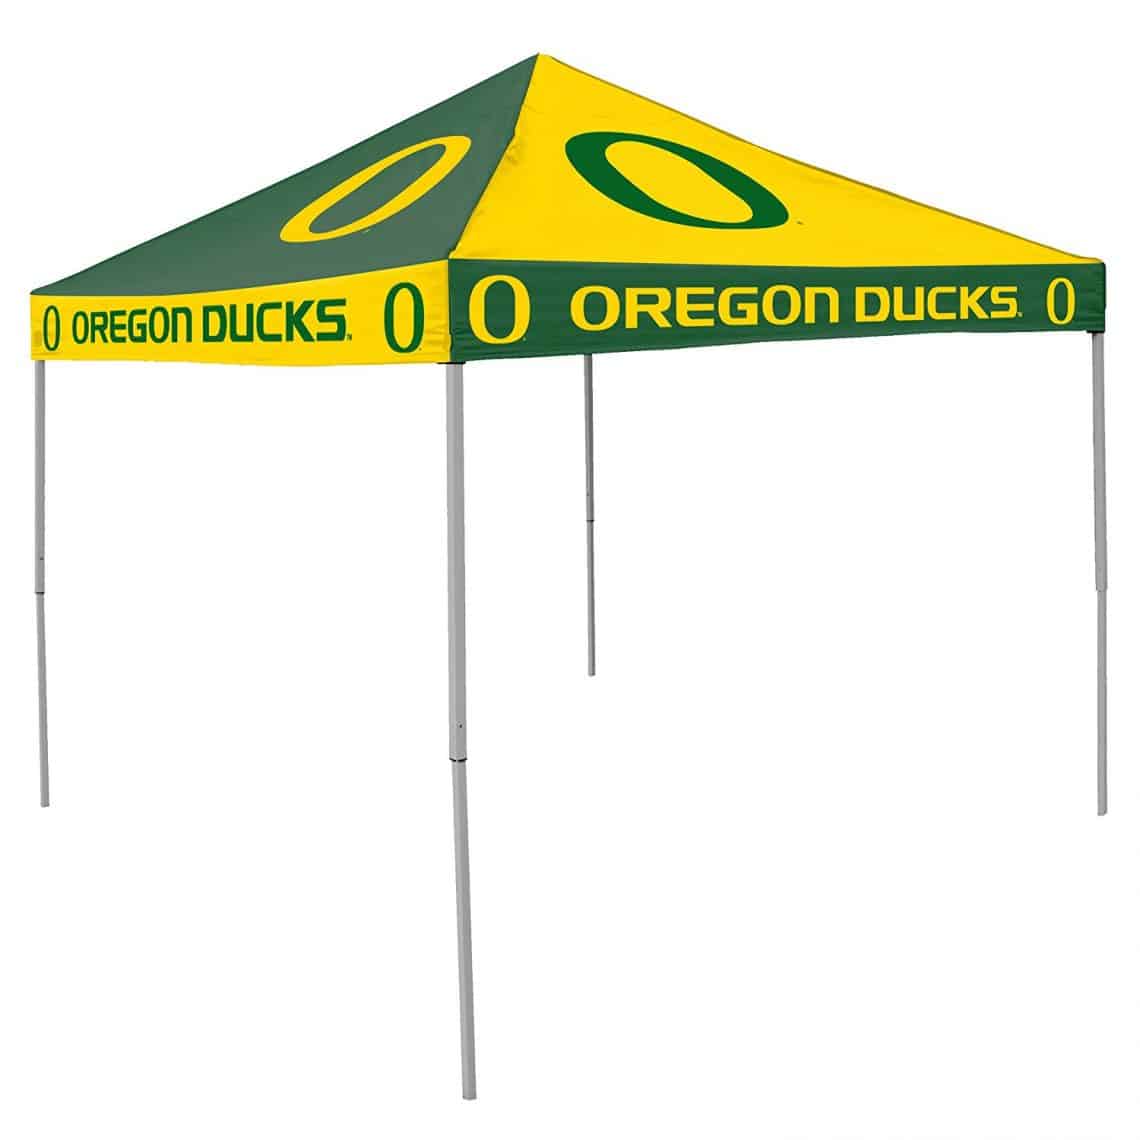 Awesome Tailgate Gear